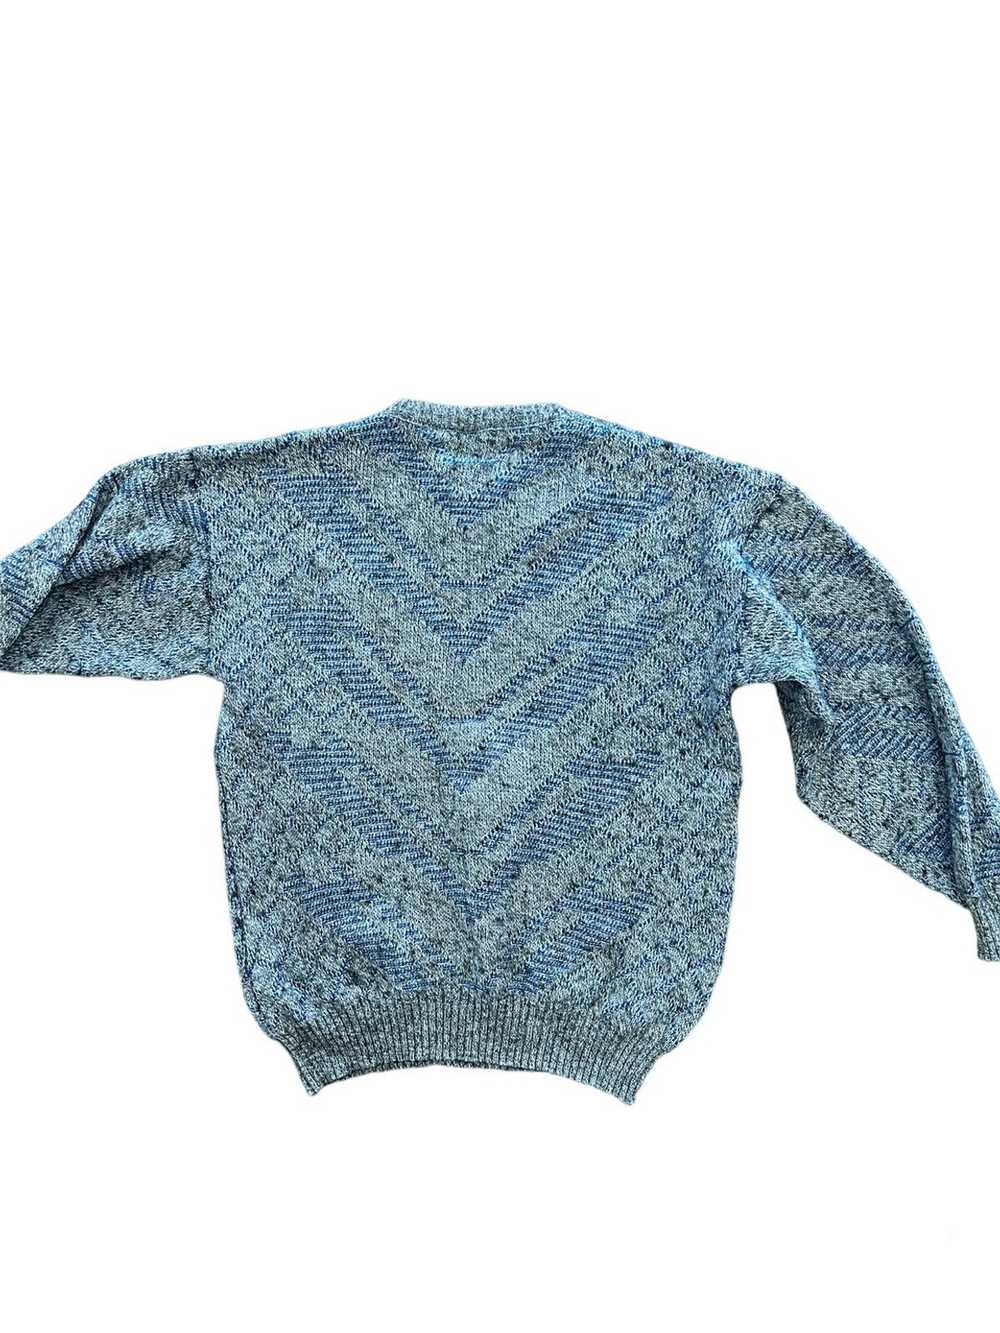 Coloured Cable Knit Sweater × Vintage Vintage Ita… - image 3